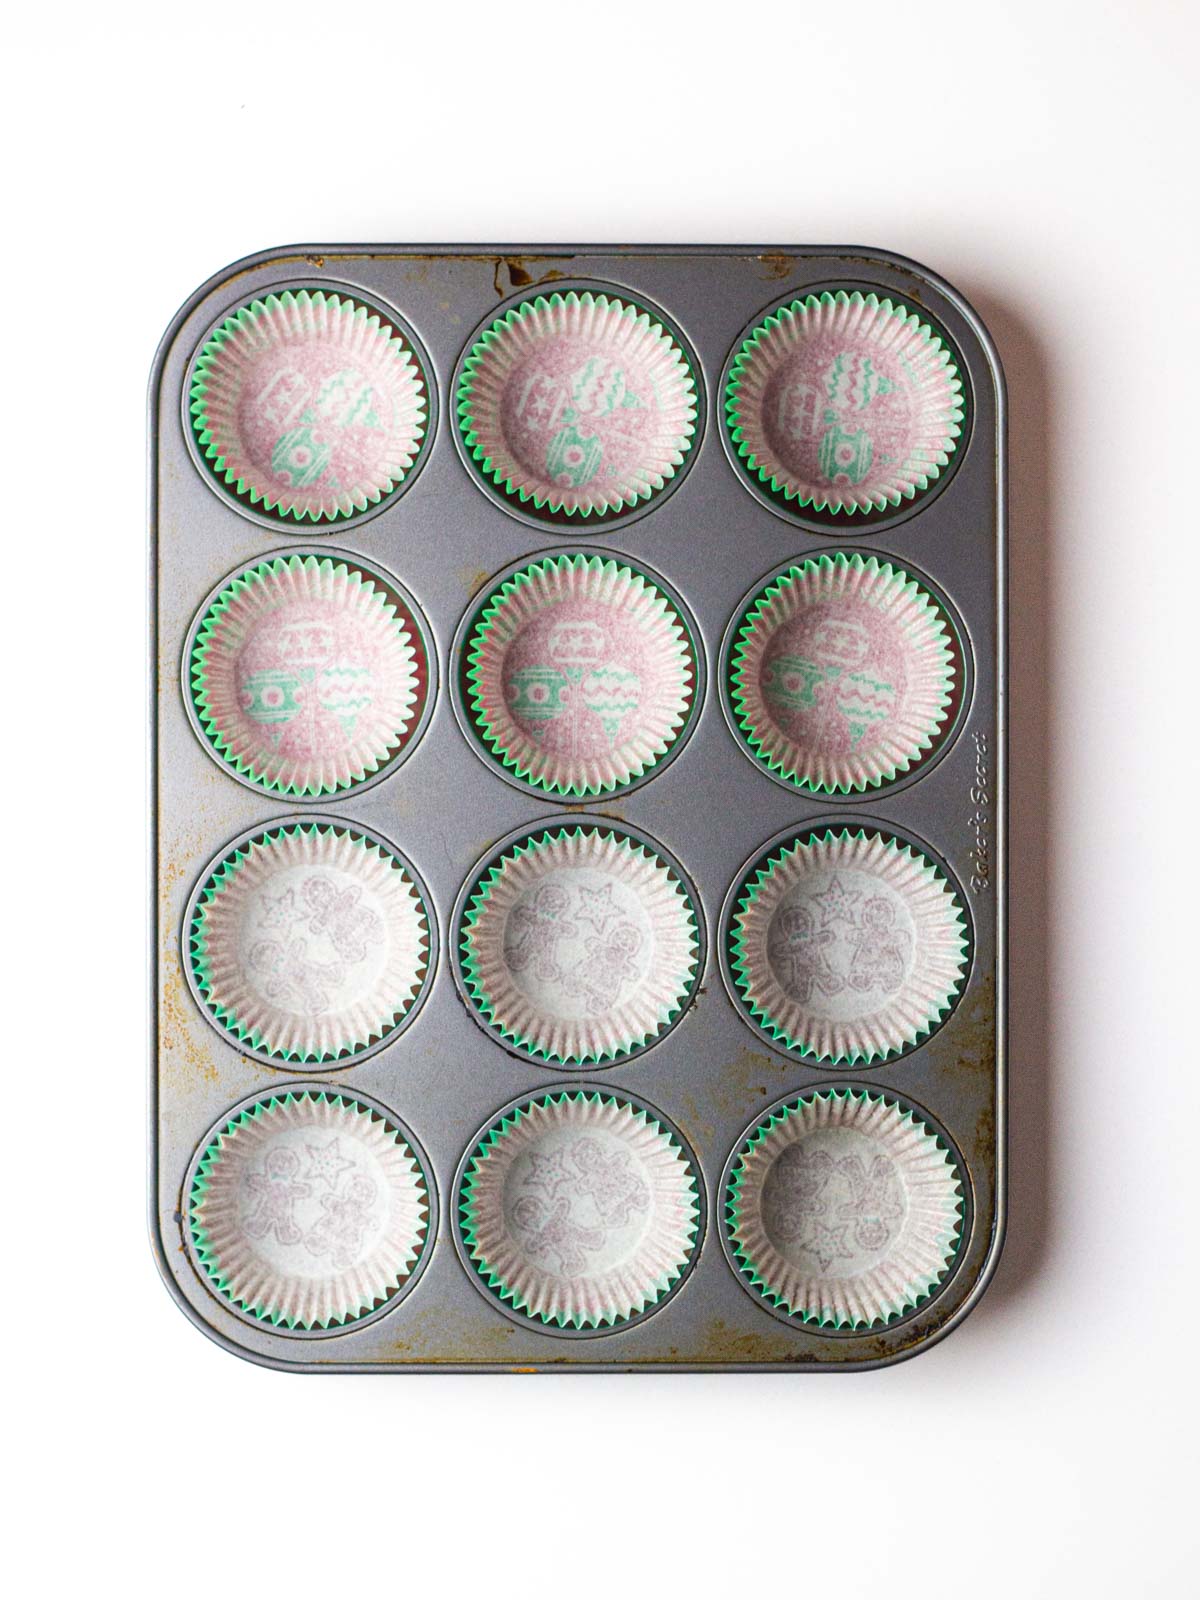 A 12-cup muffin pan lined with christmas themed paper liners.